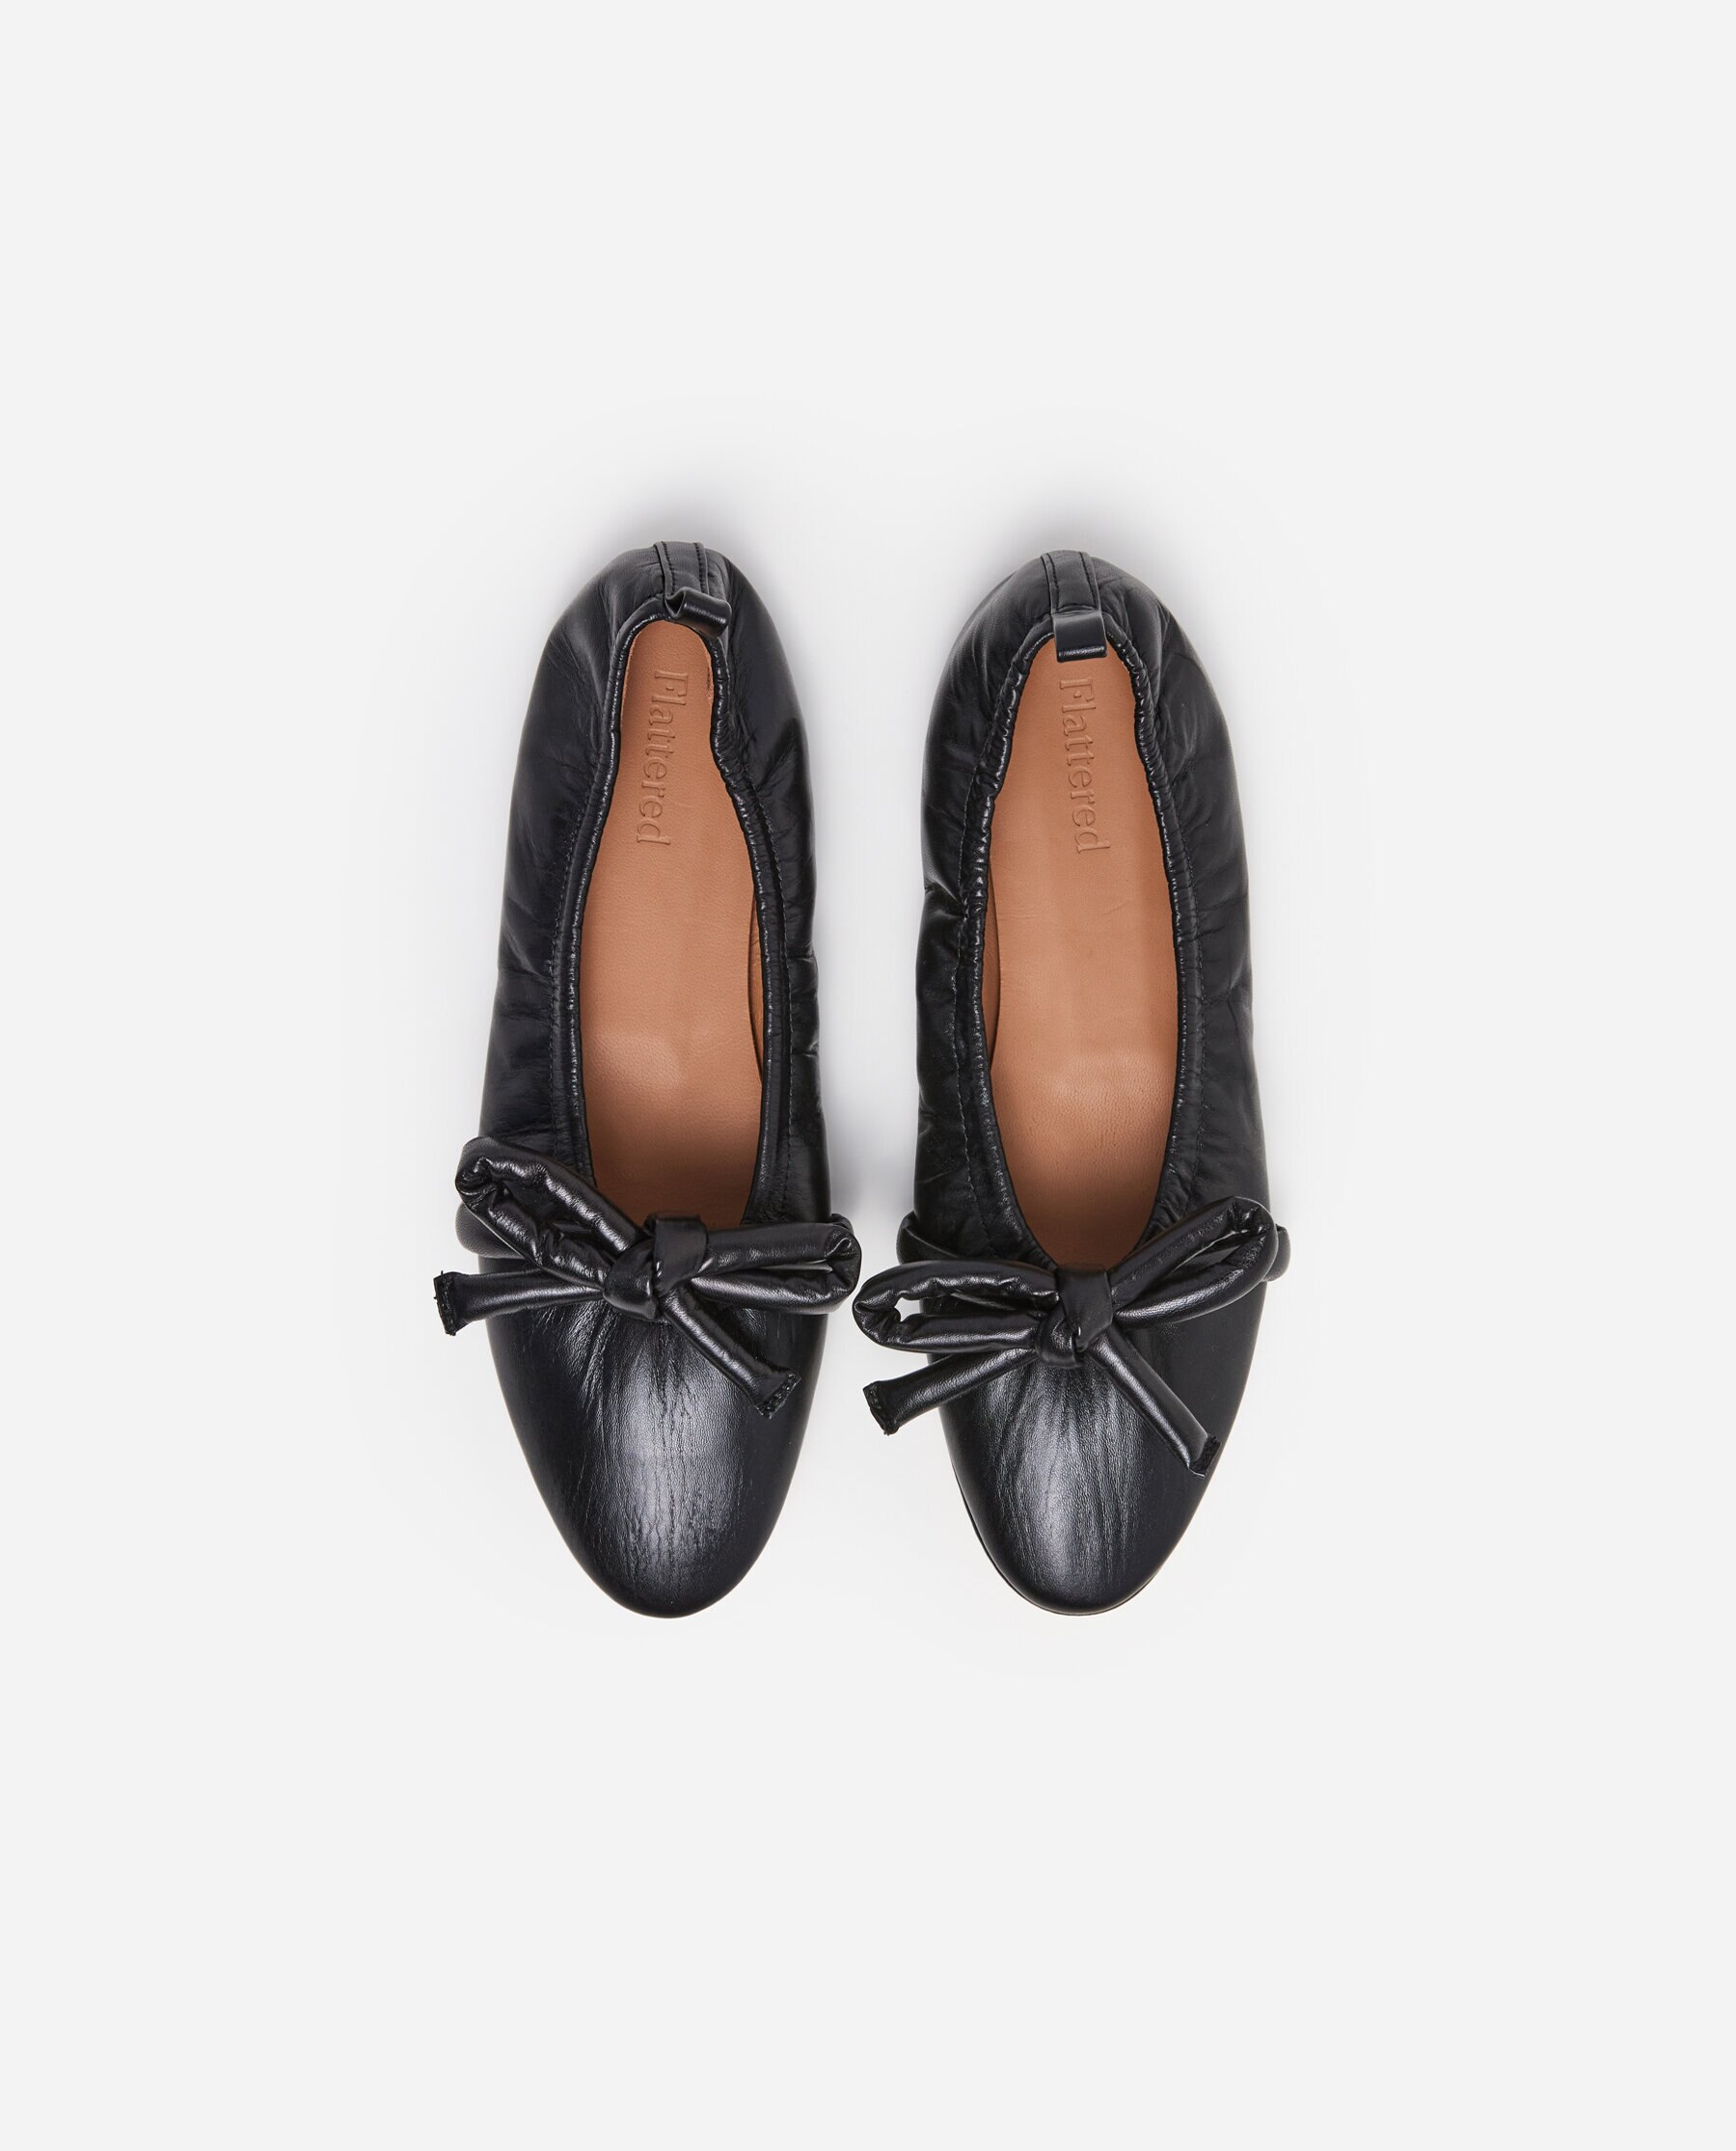 Polly Leather Black | Flattered.com